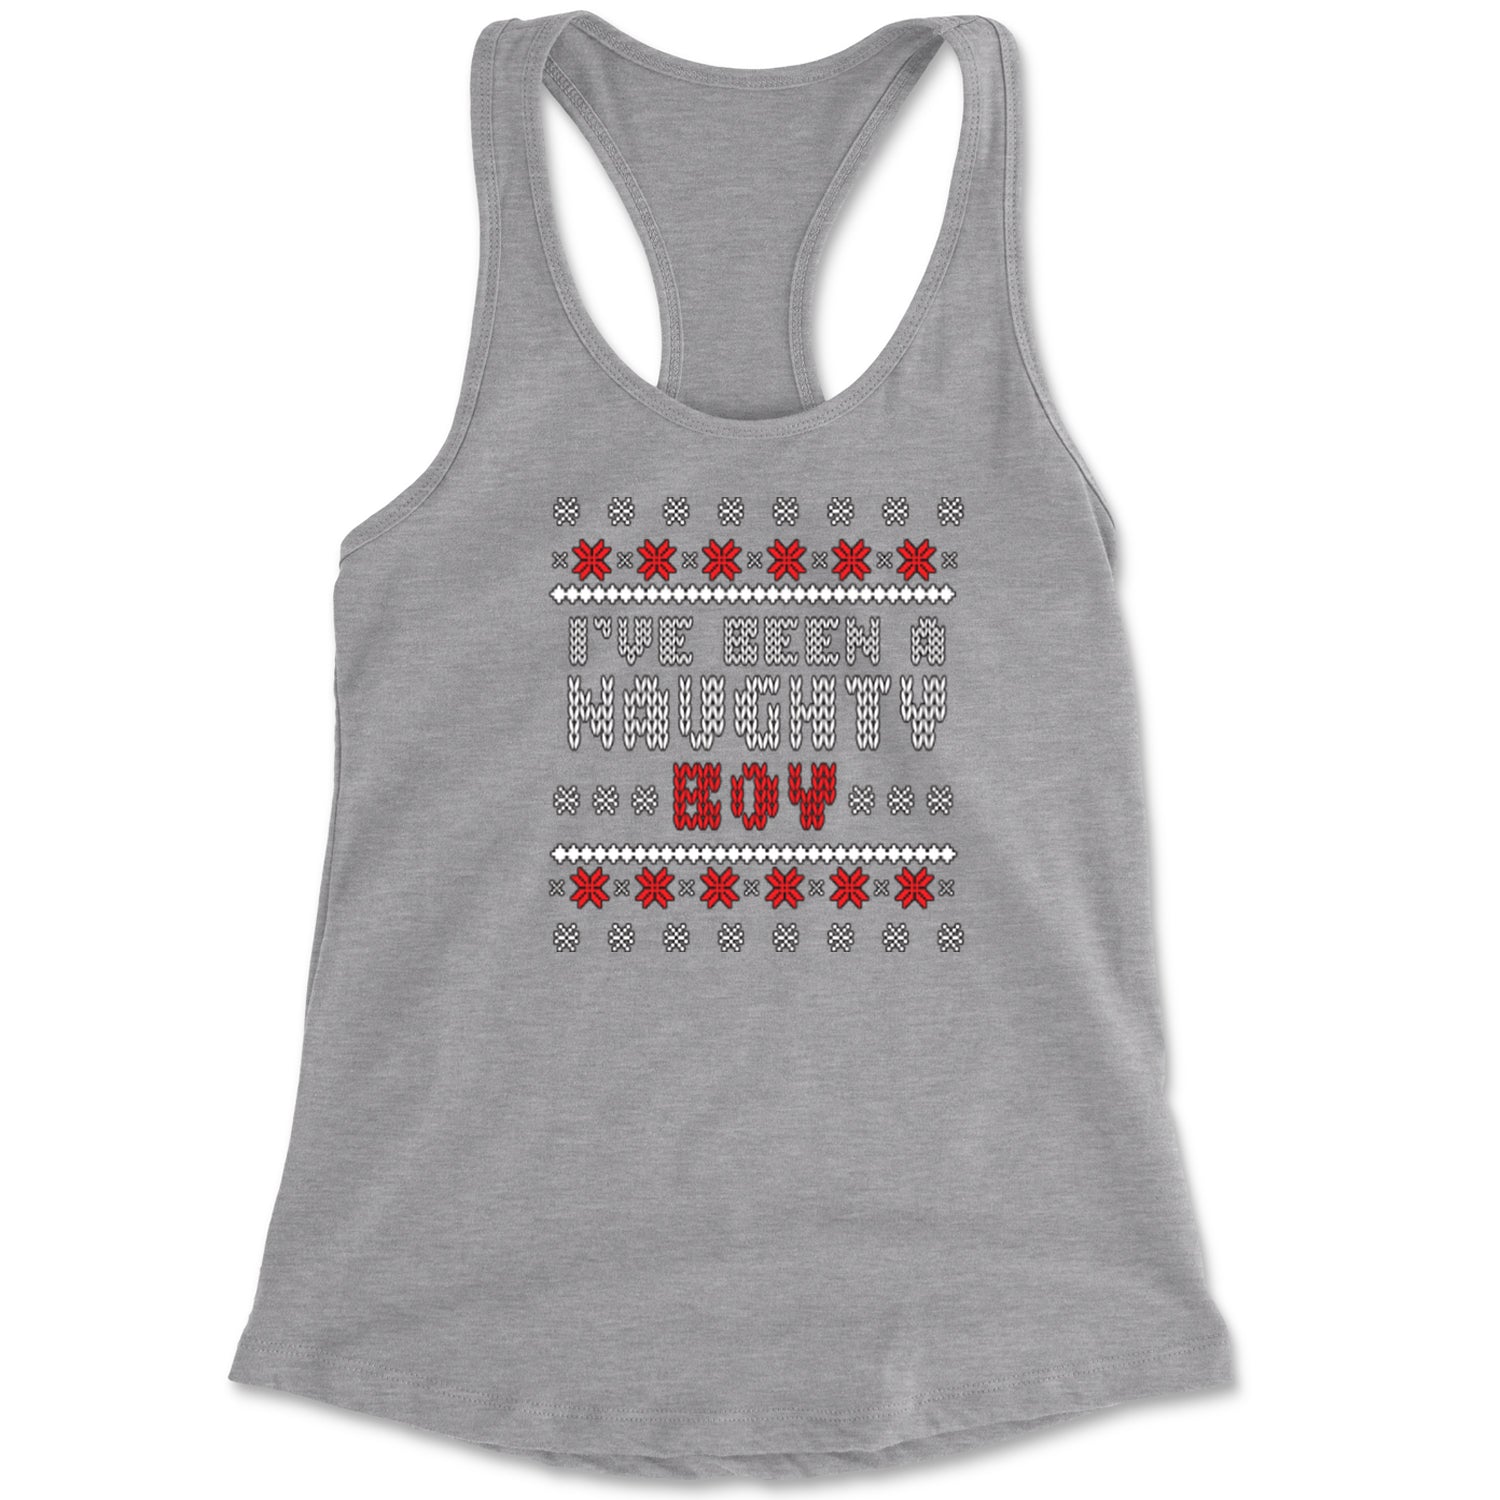 I've Been A Naughty Boy Ugly Christmas Racerback Tank Top for Women list, naughty, nice, santa, ugly, xmas by Expression Tees